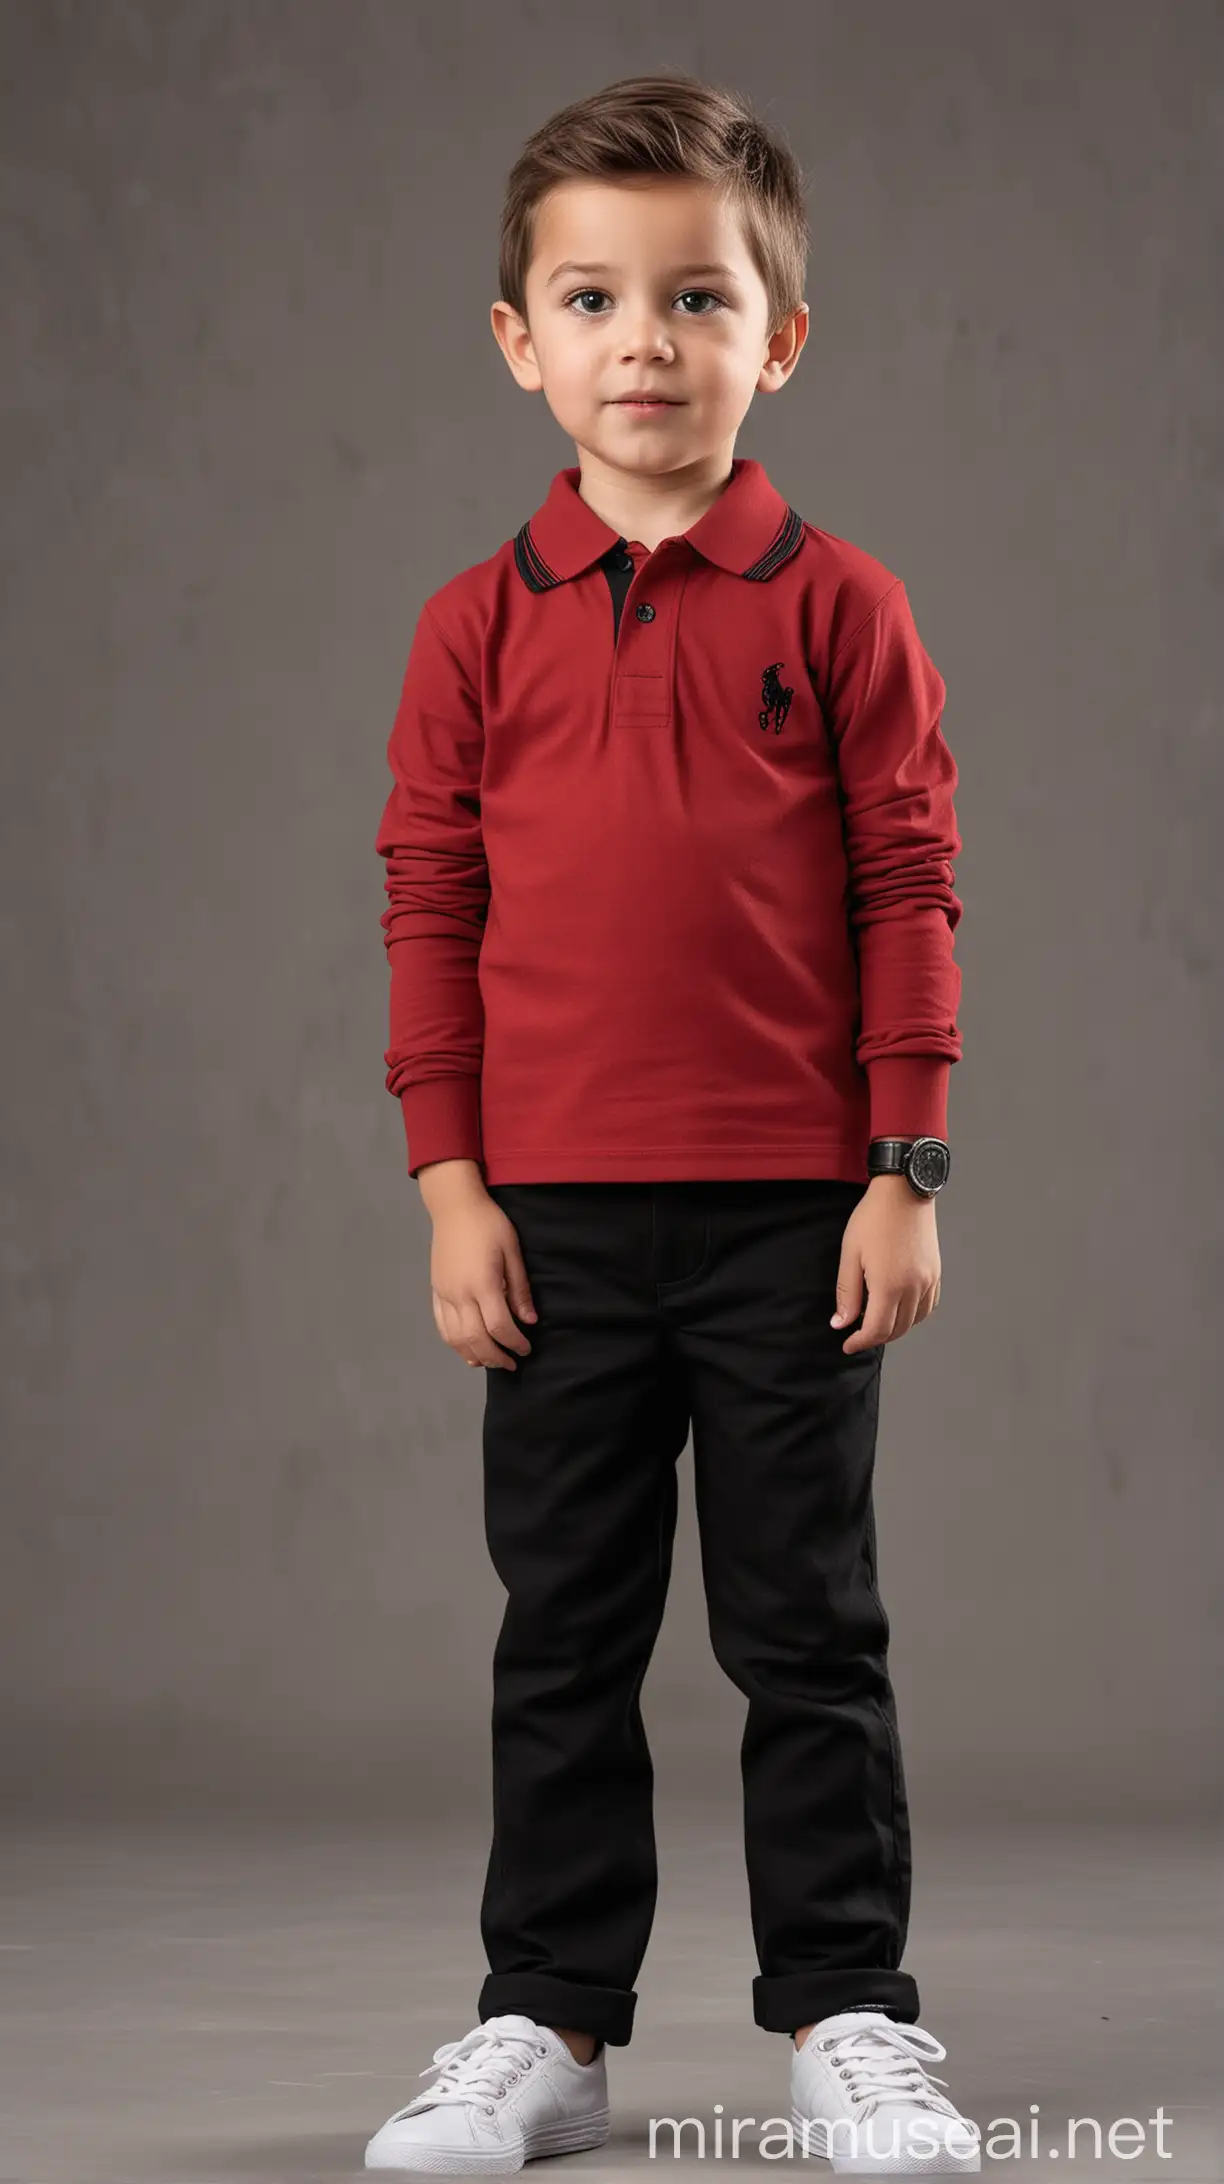 Urban Boy in Red Polo Shirt and Black Trousers Authentic Full Body Portrait